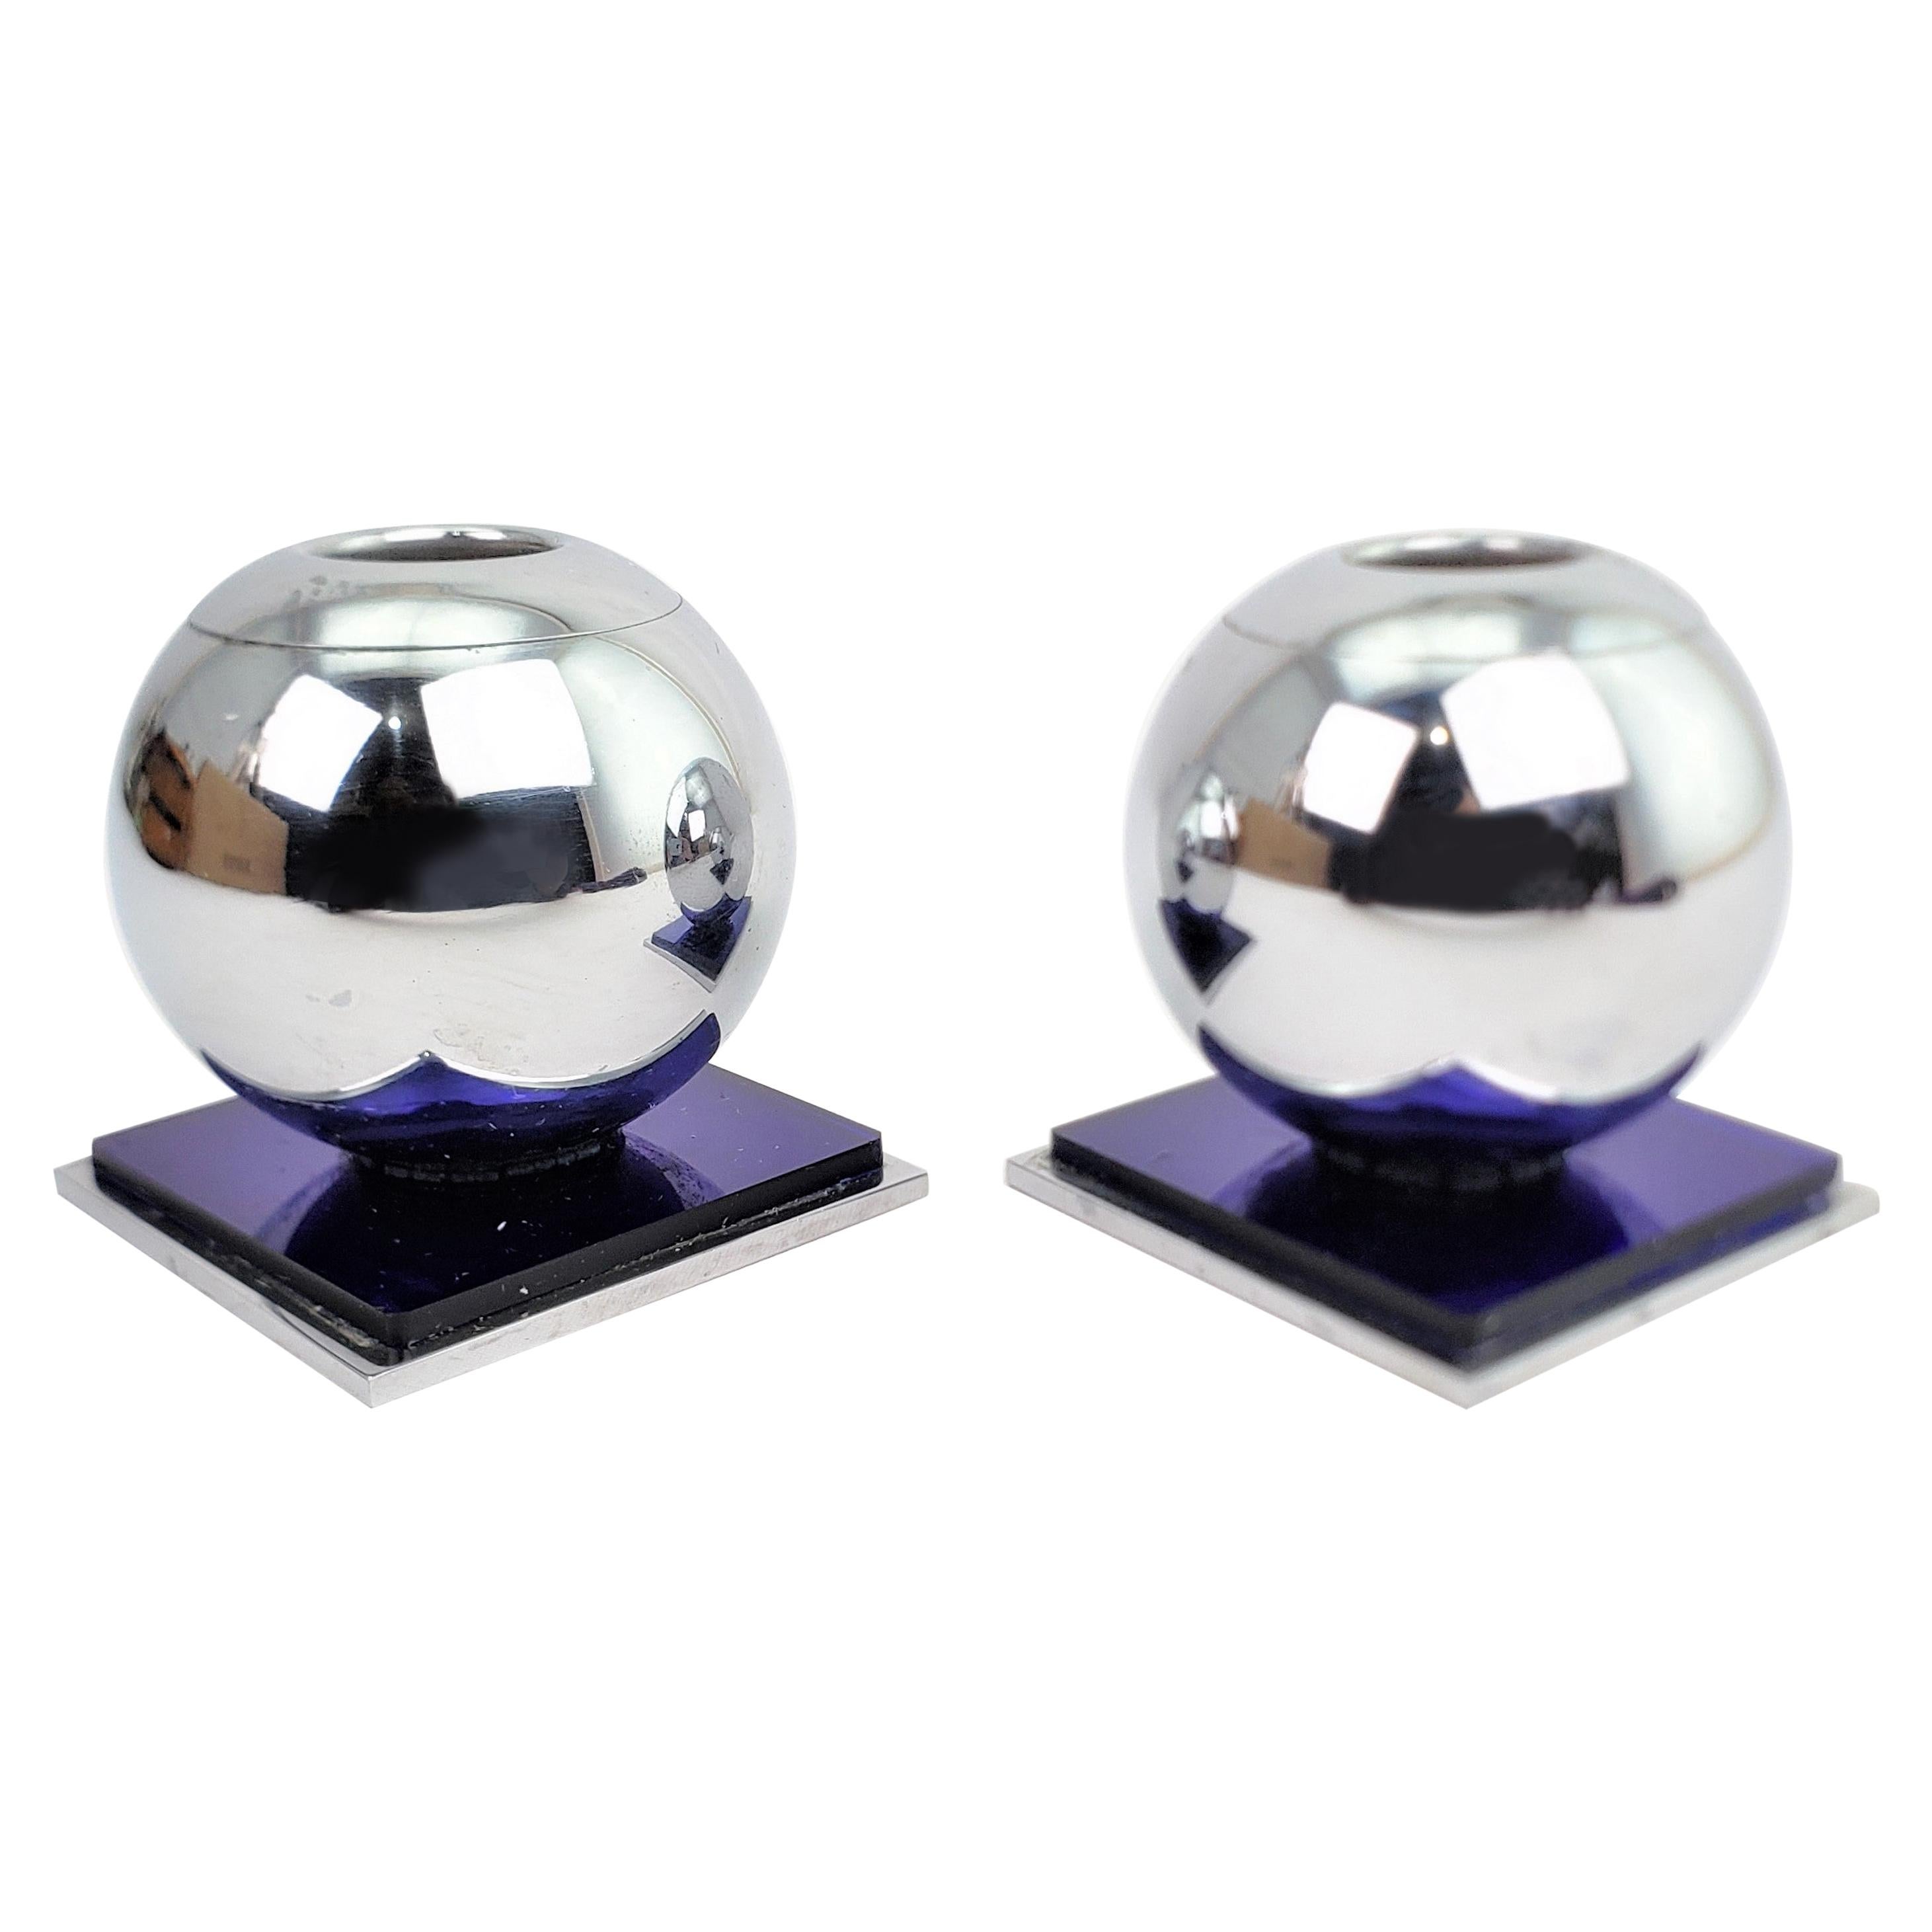 Mid-Century Chrome Ball & Steel Based Candlesticks with Cobalt Blue Accents